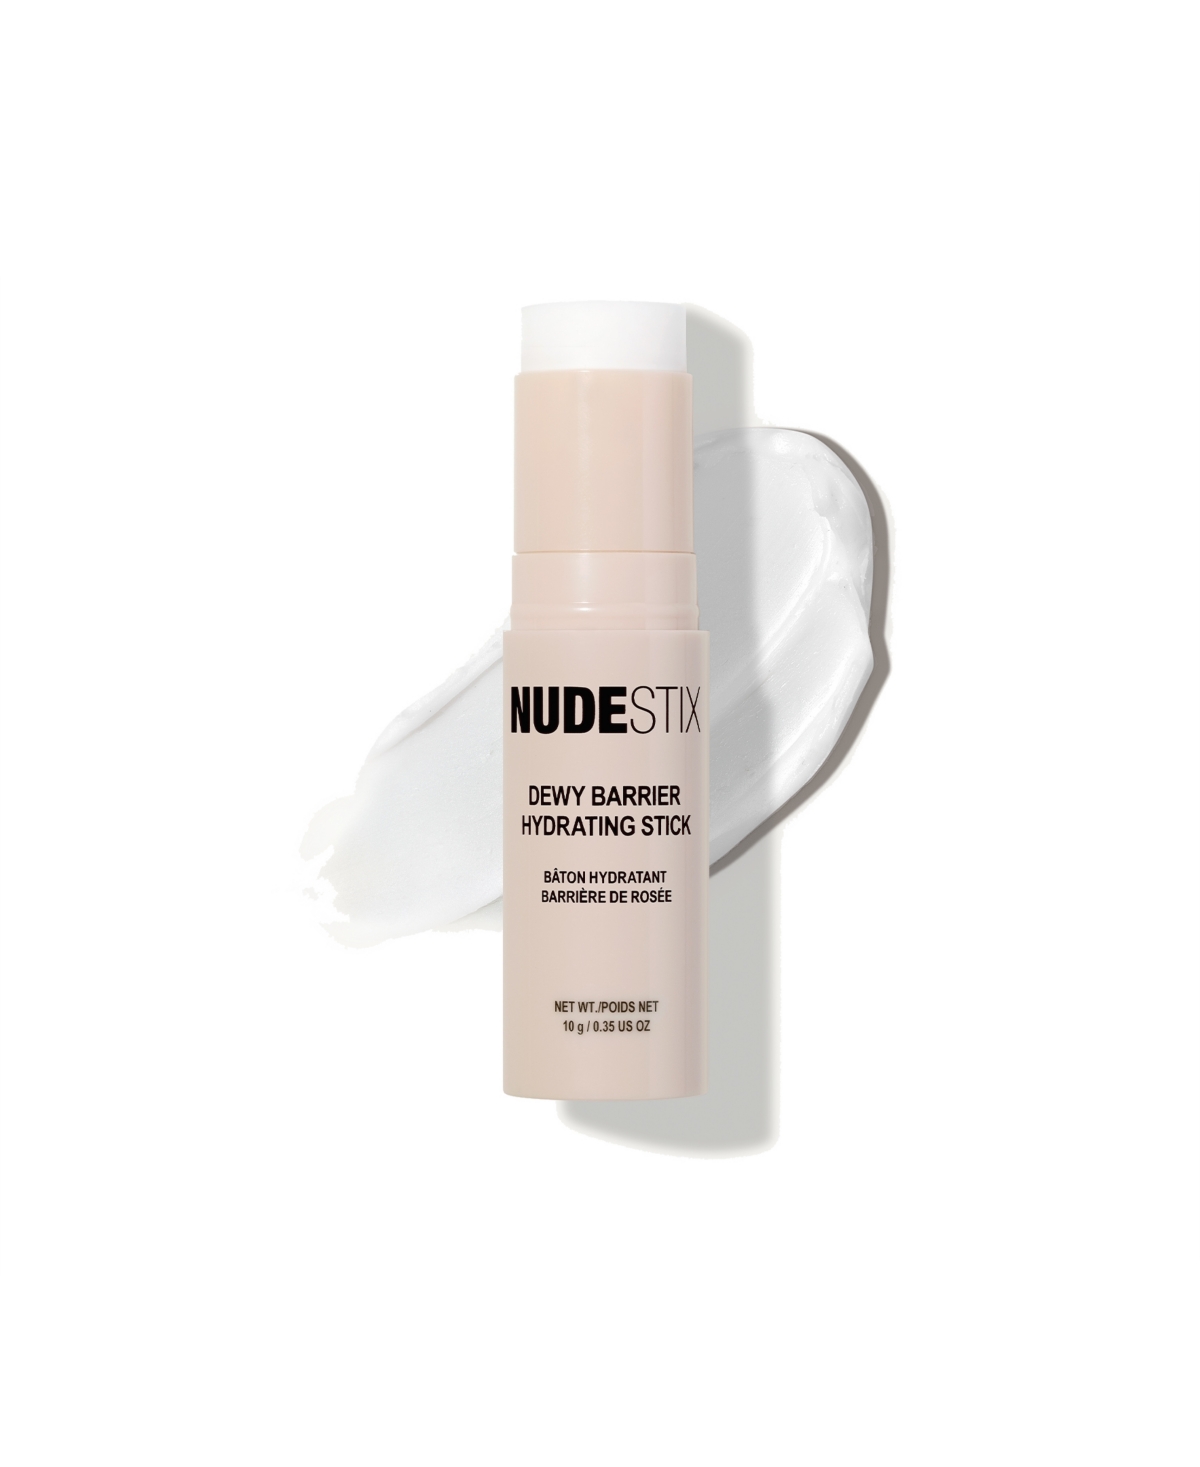 Nudestix Dewy Barrier Hydrating Stick, 0.35 Oz. In No Color